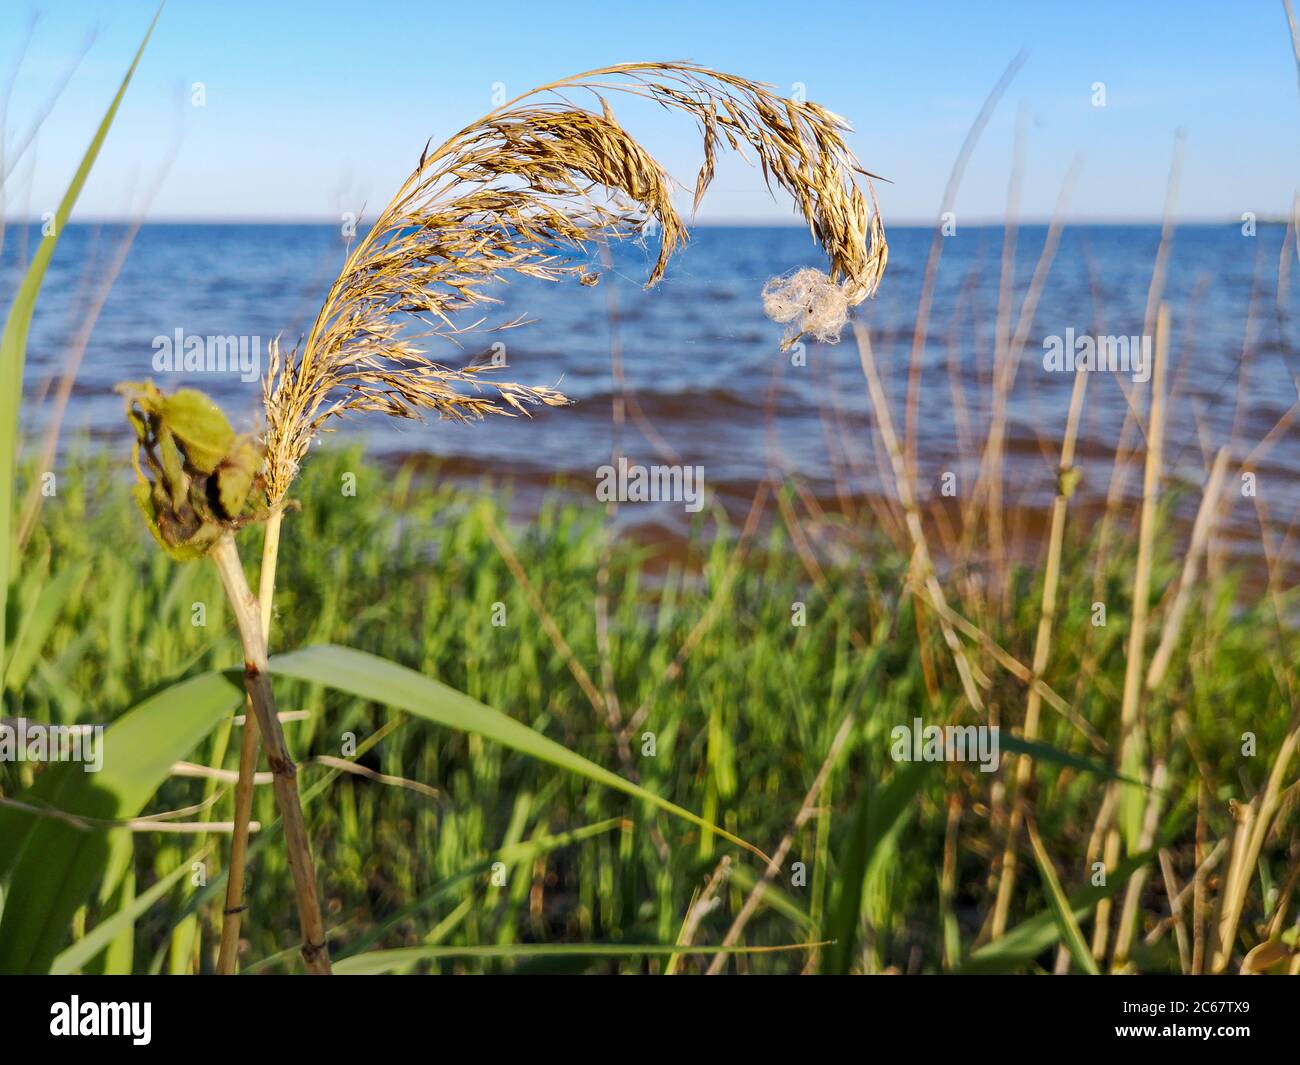 A ball of spiderweb hanging on cane rush curly spiky blossom growing at river beach. Blue and red river, green vegetation and blue sky on horizon. Stock Photo